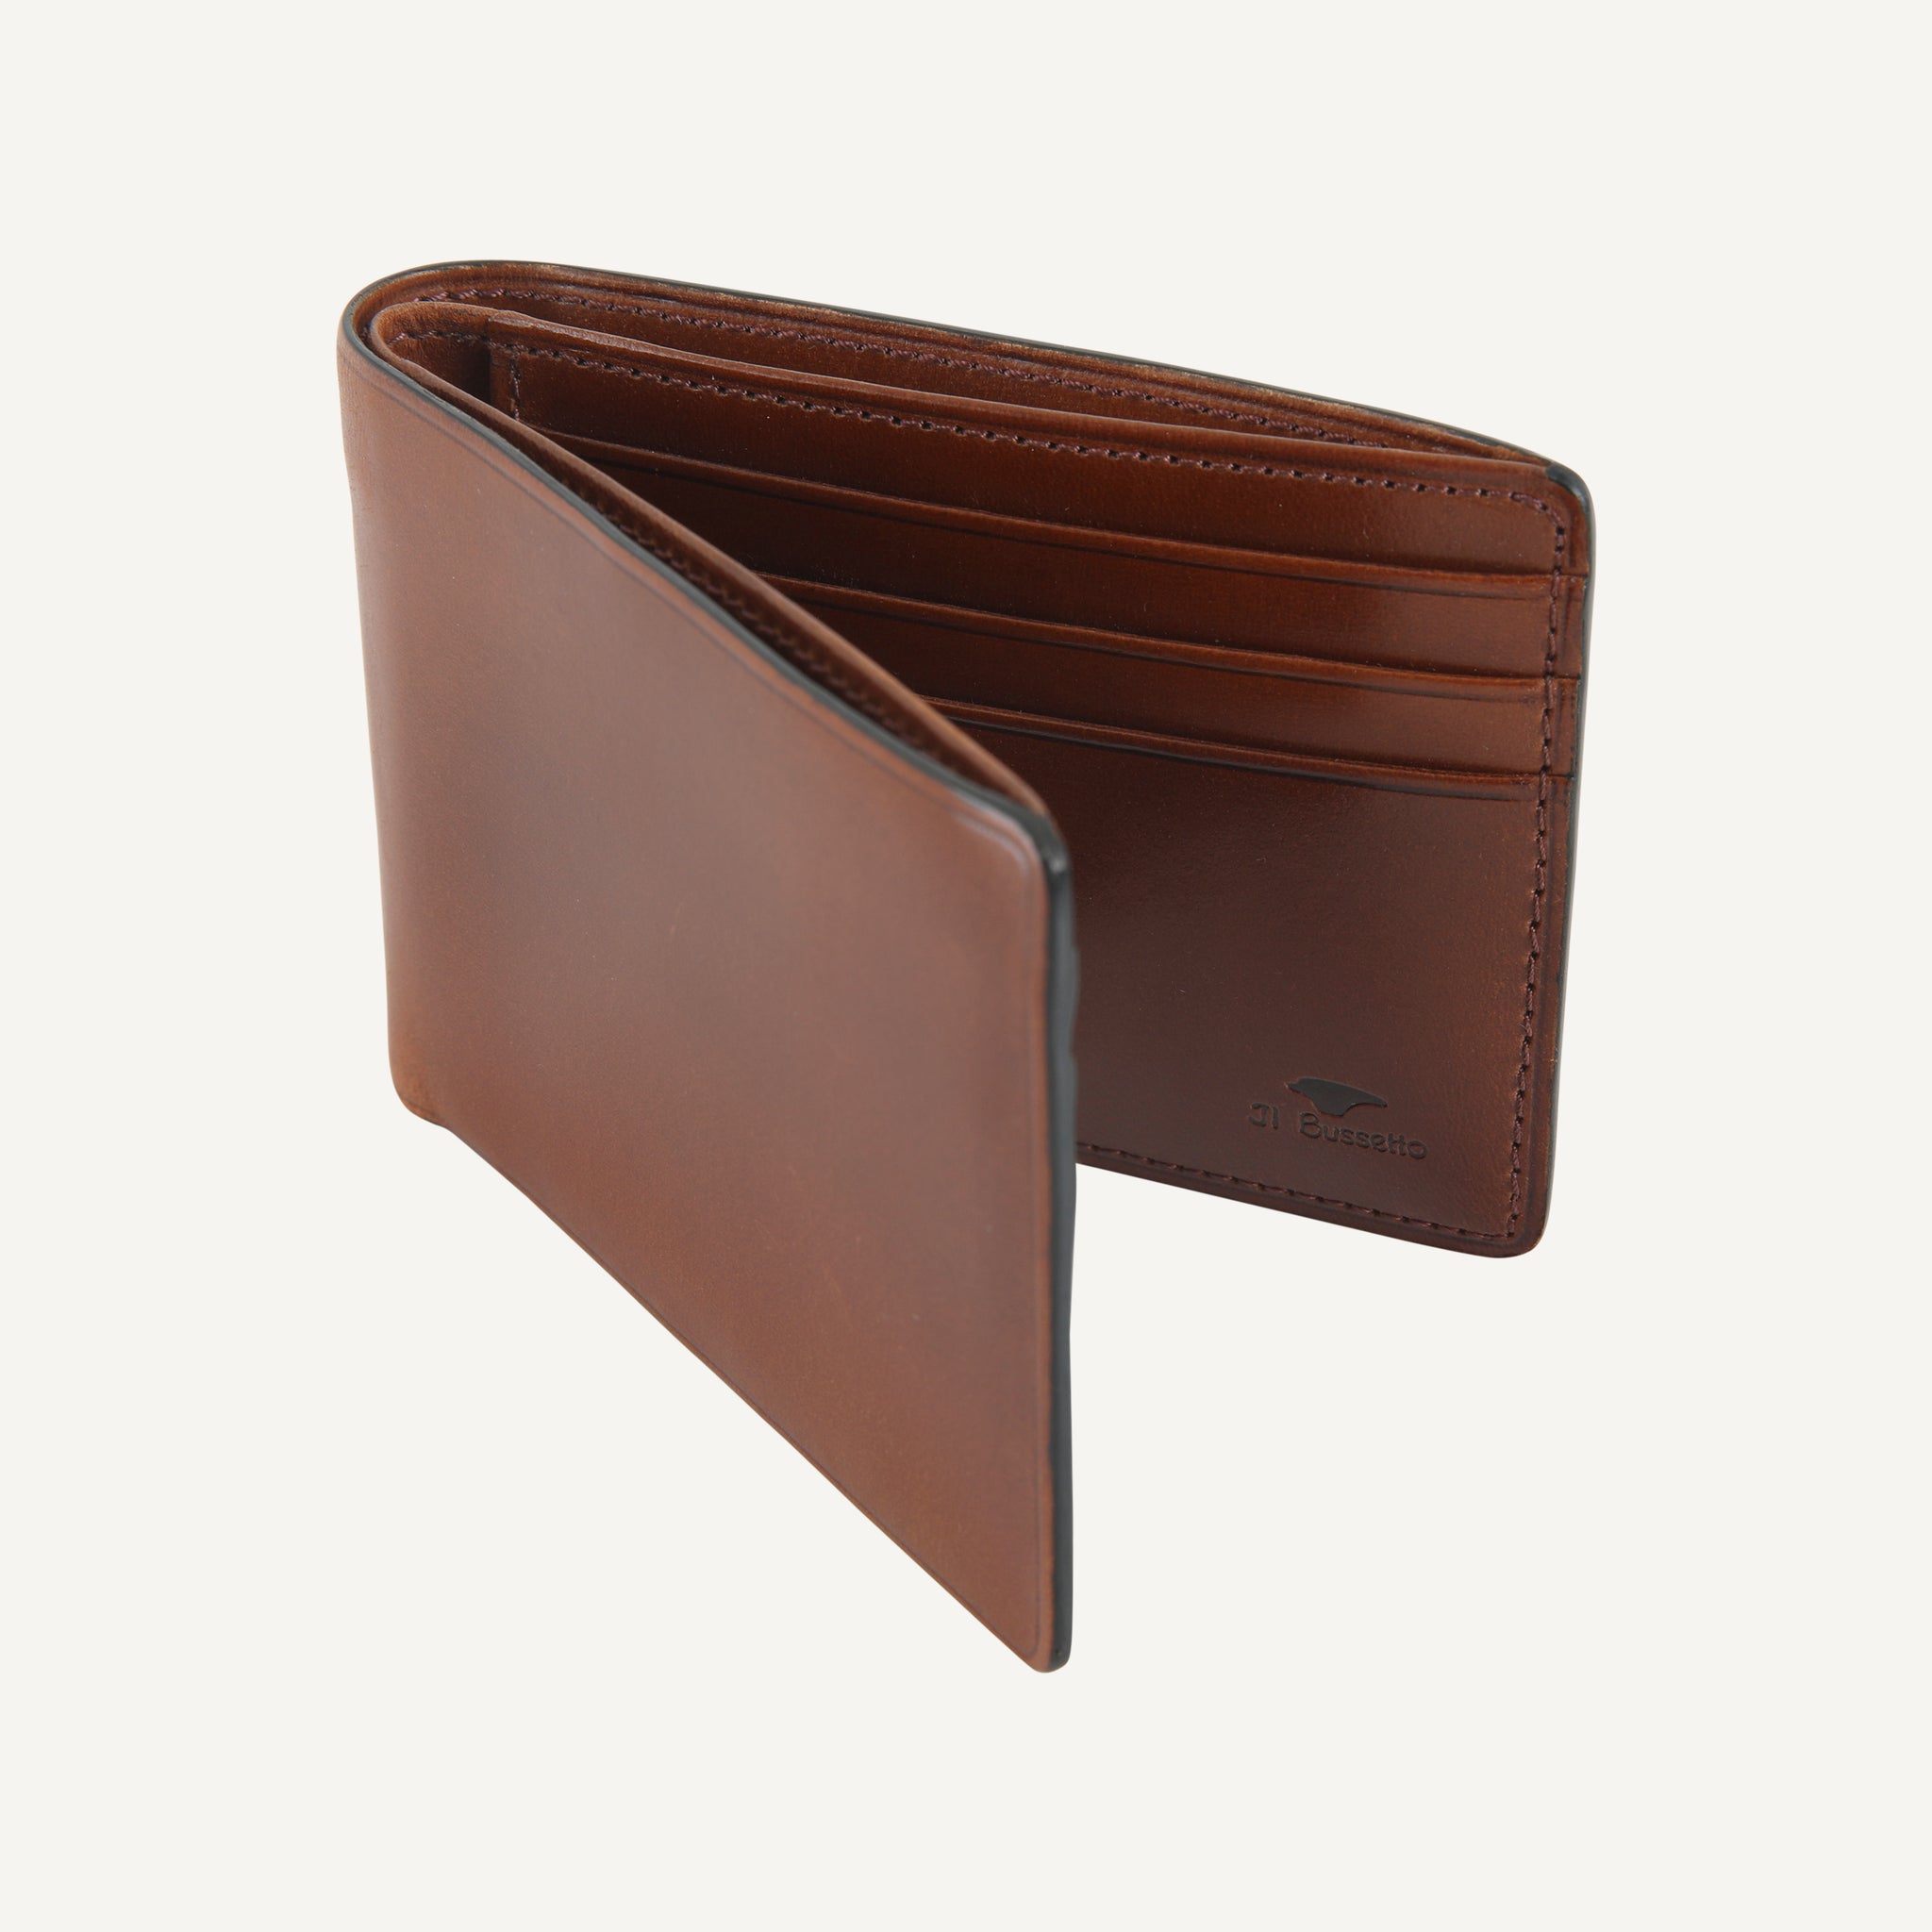 IL BUSSETTO LEATHER BILLFOLD